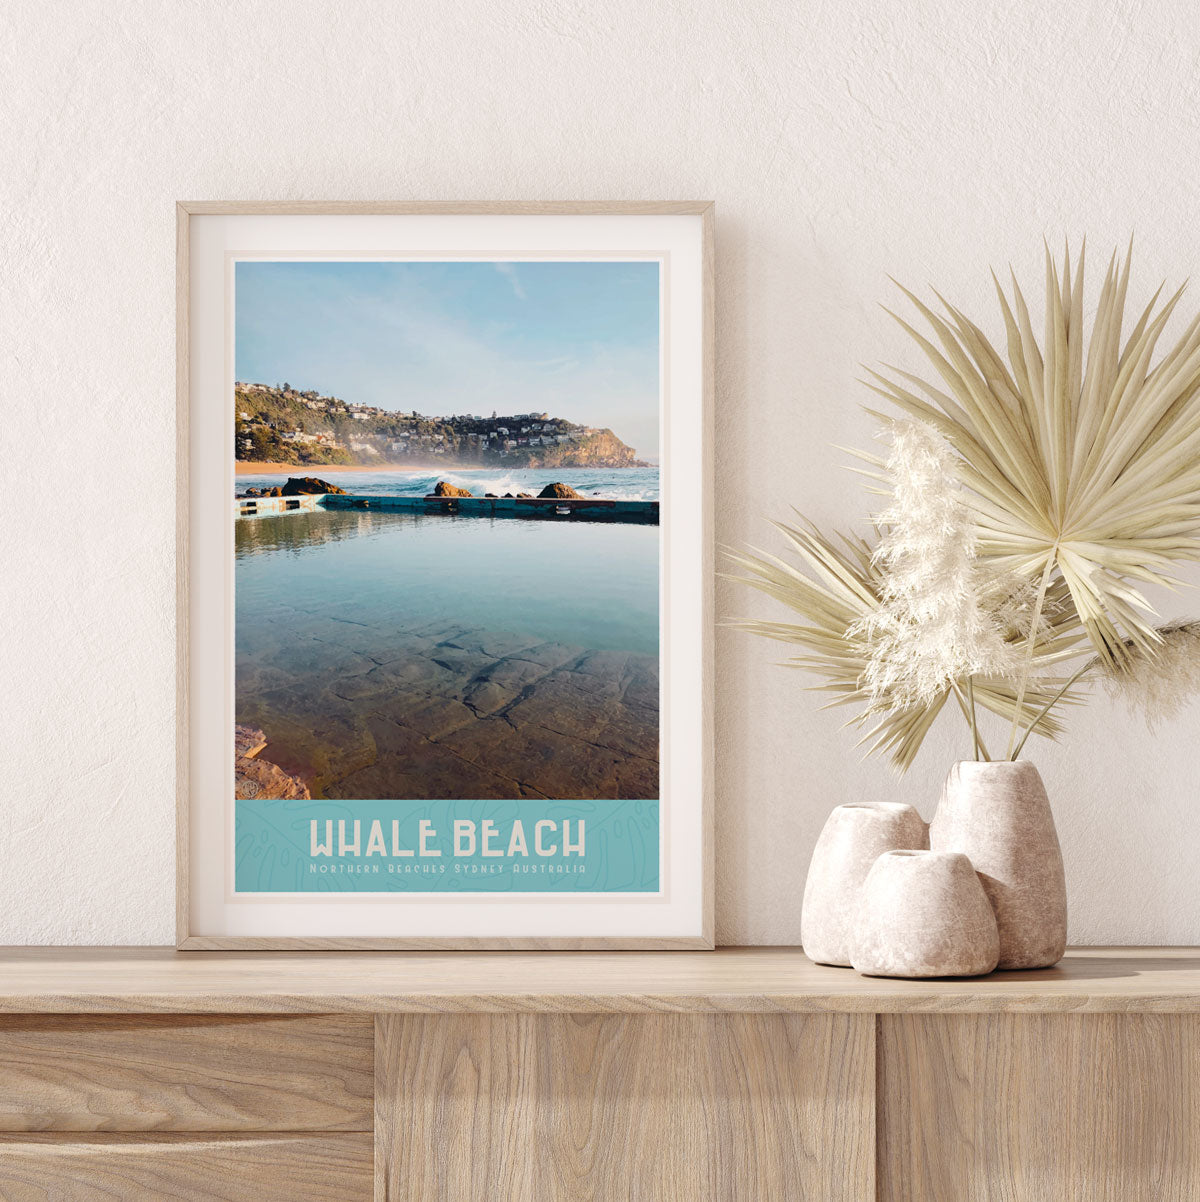 Whale Beach NSW framed vintage style travel print by Places we luv